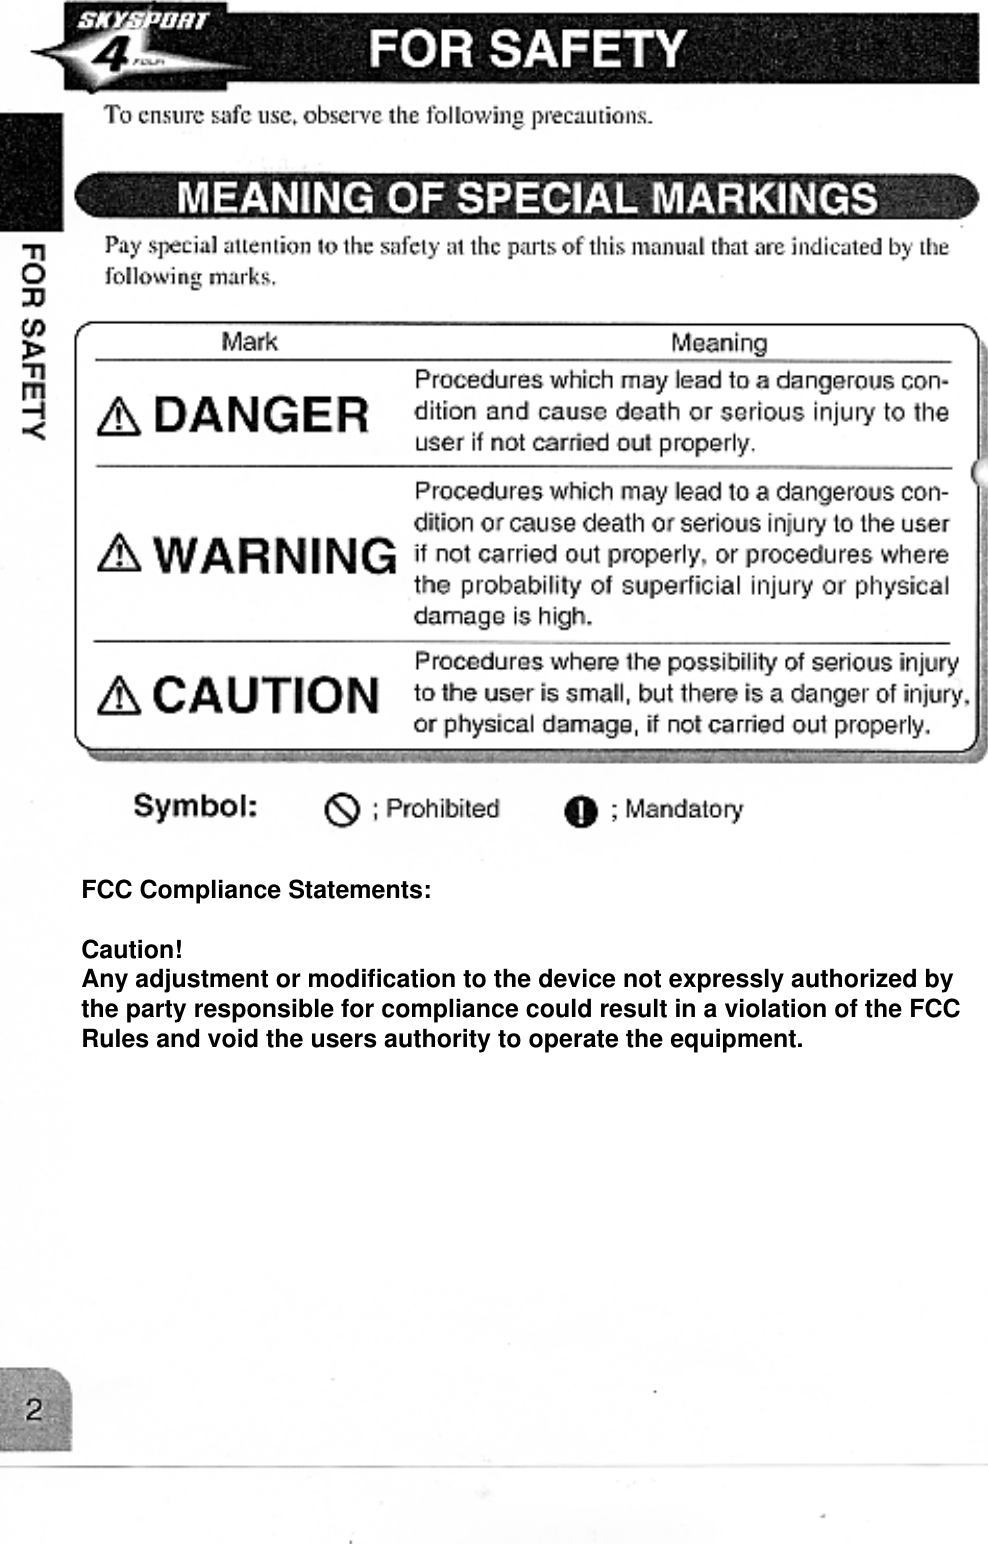 FCC Compliance Statements:Caution!Any adjustment or modification to the device not expressly authorized bythe party responsible for compliance could result in a violation of the FCCRules and void the users authority to operate the equipment.